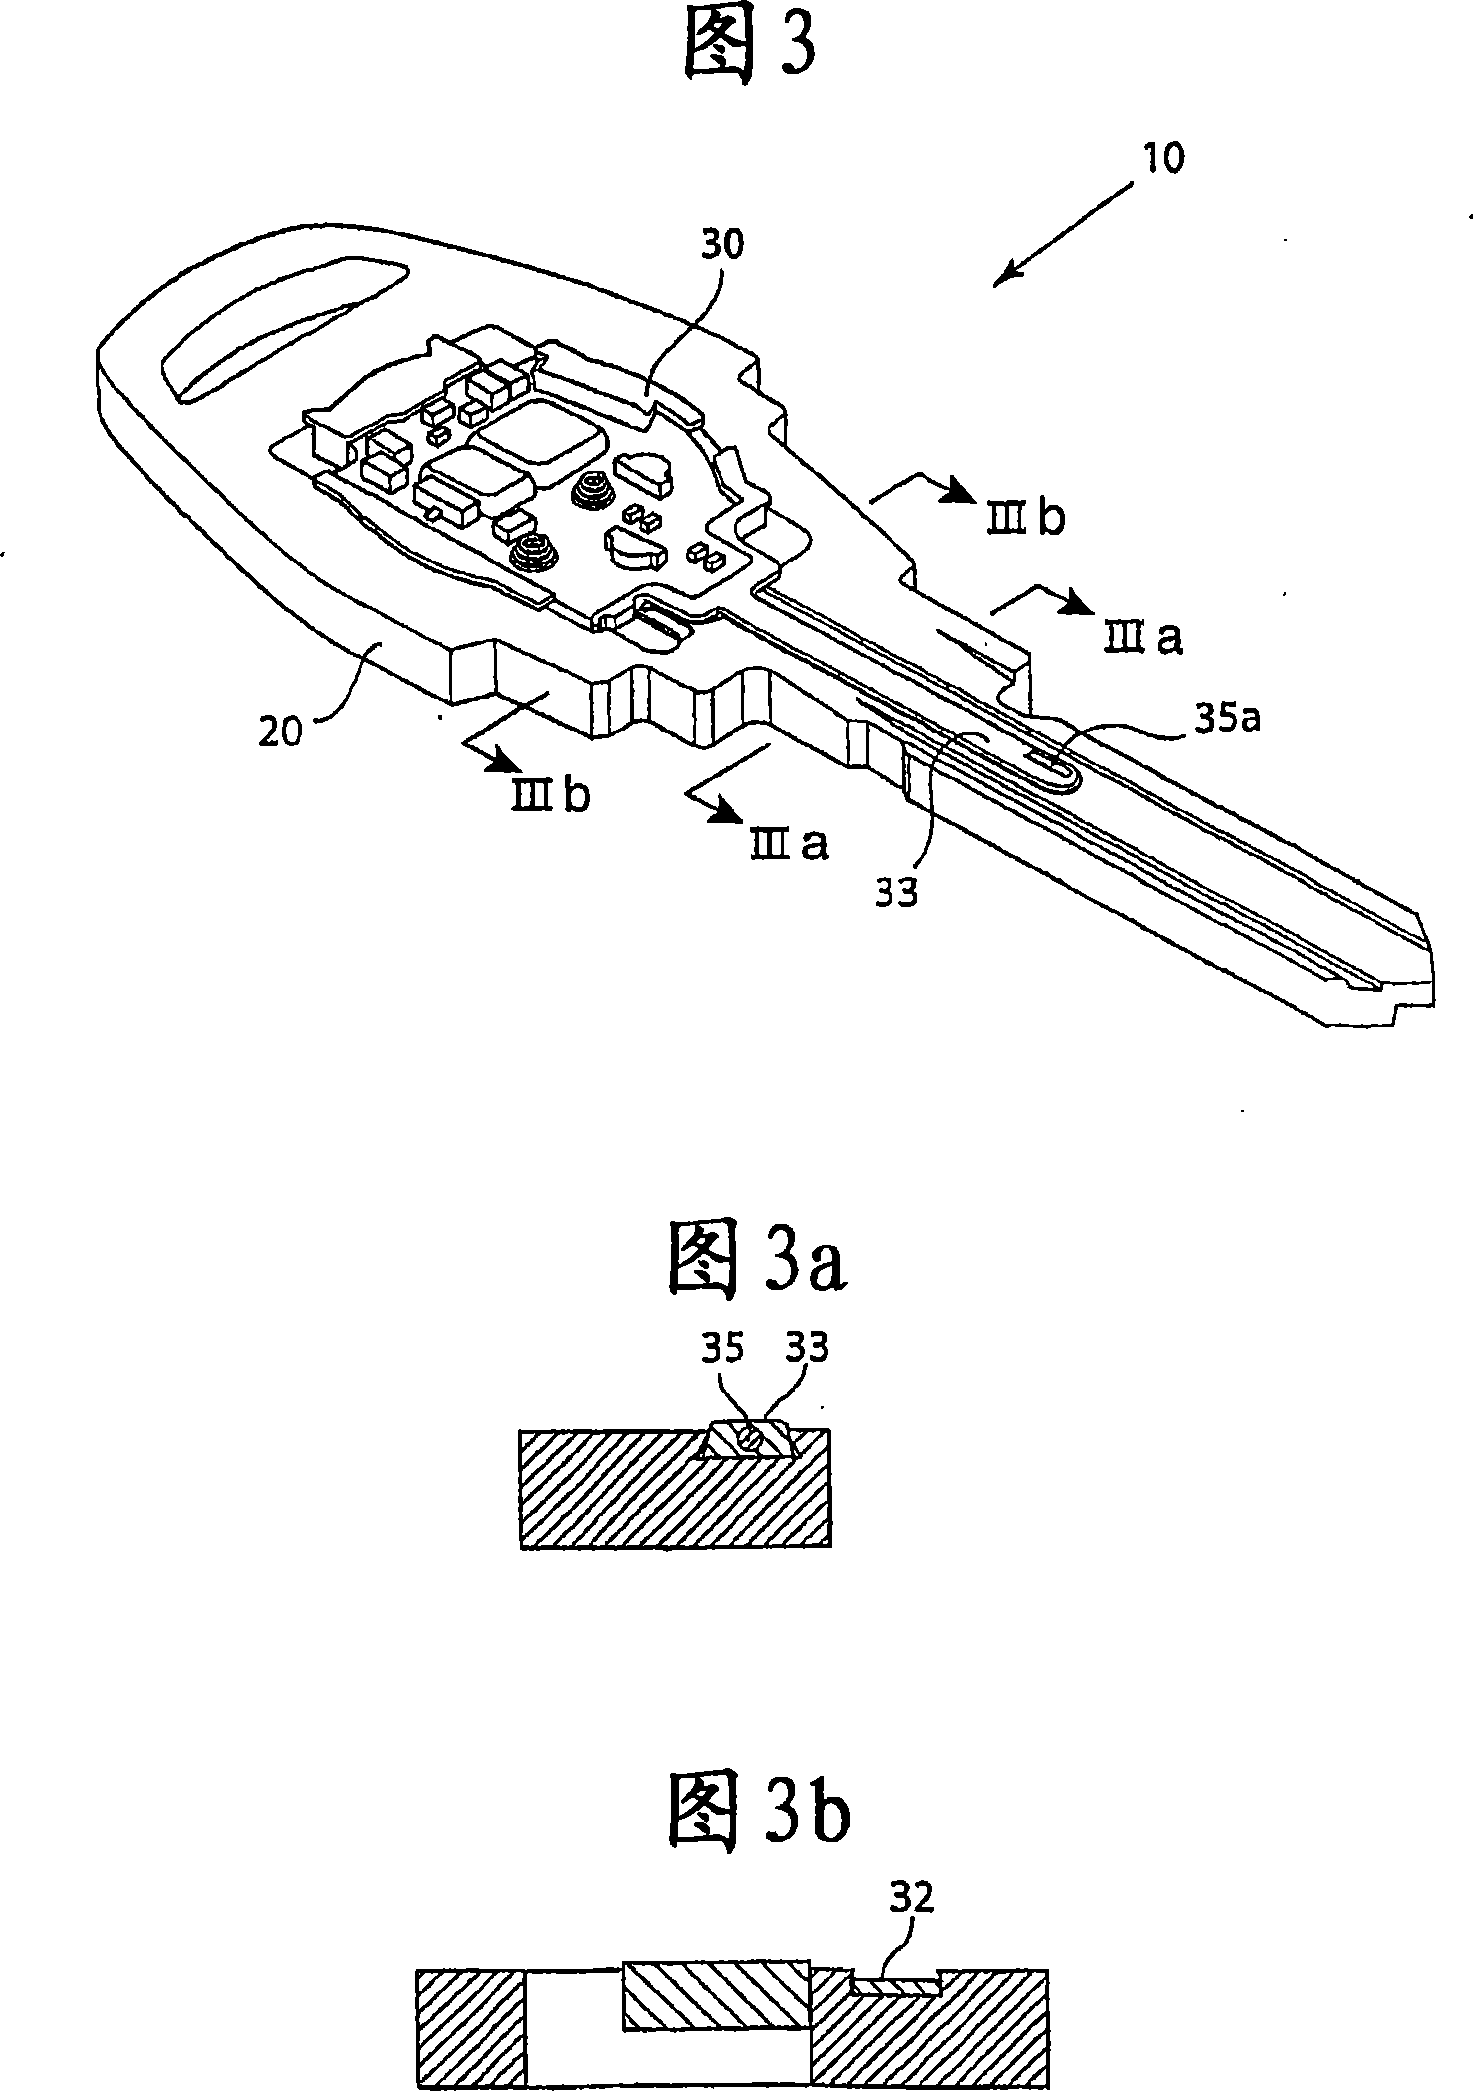 A lock key and a method of its manufacture